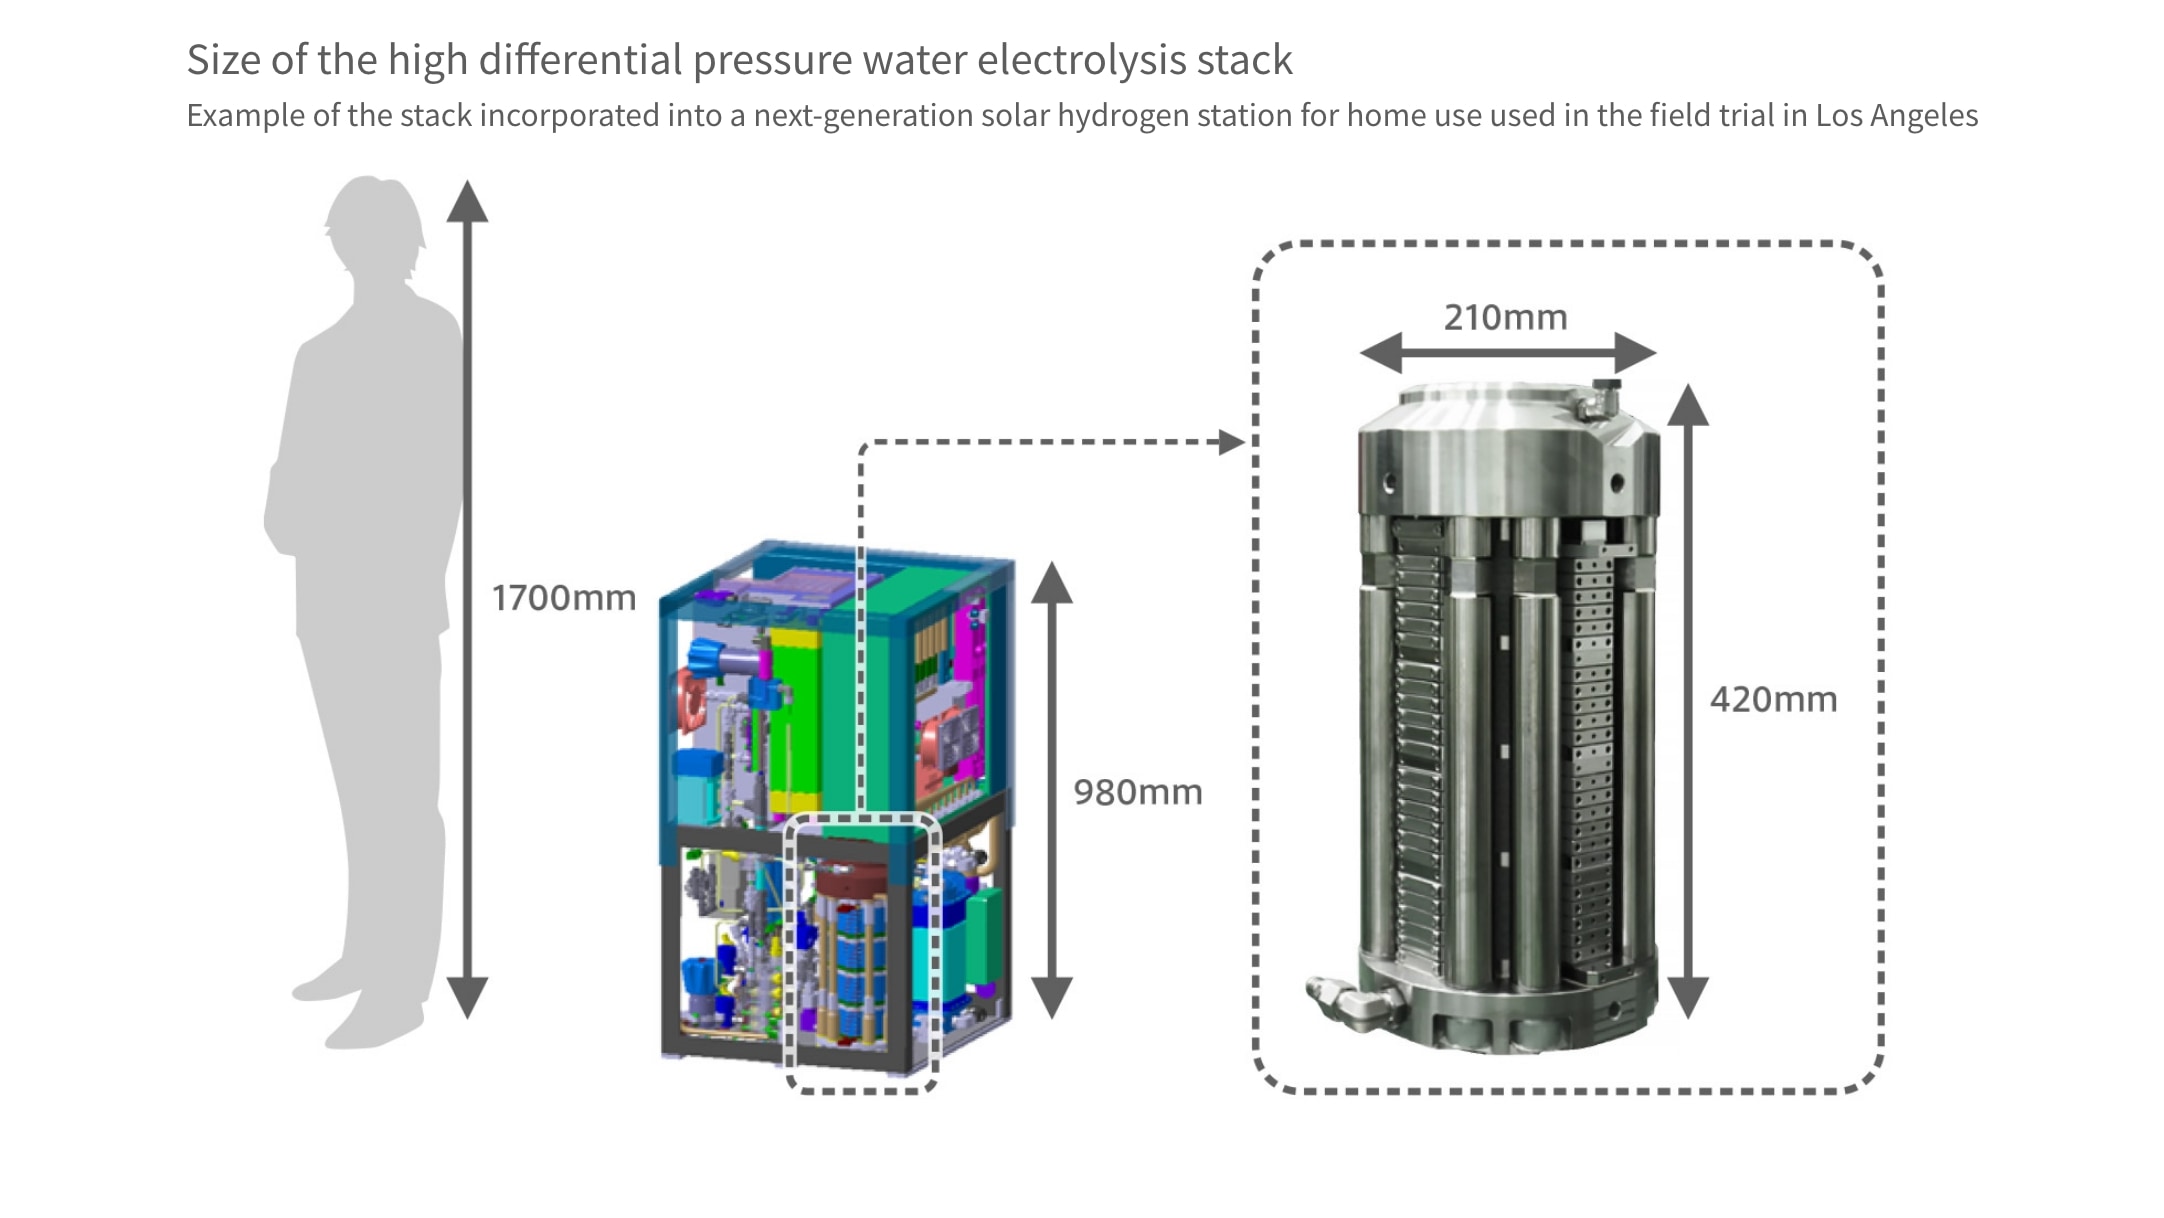 The high differential pressure water electrolysis system is only 980 mm tall. Mounted inside, the high differential pressure water electrolysis stack is a compact 420 mm tall and 210 mm wide.